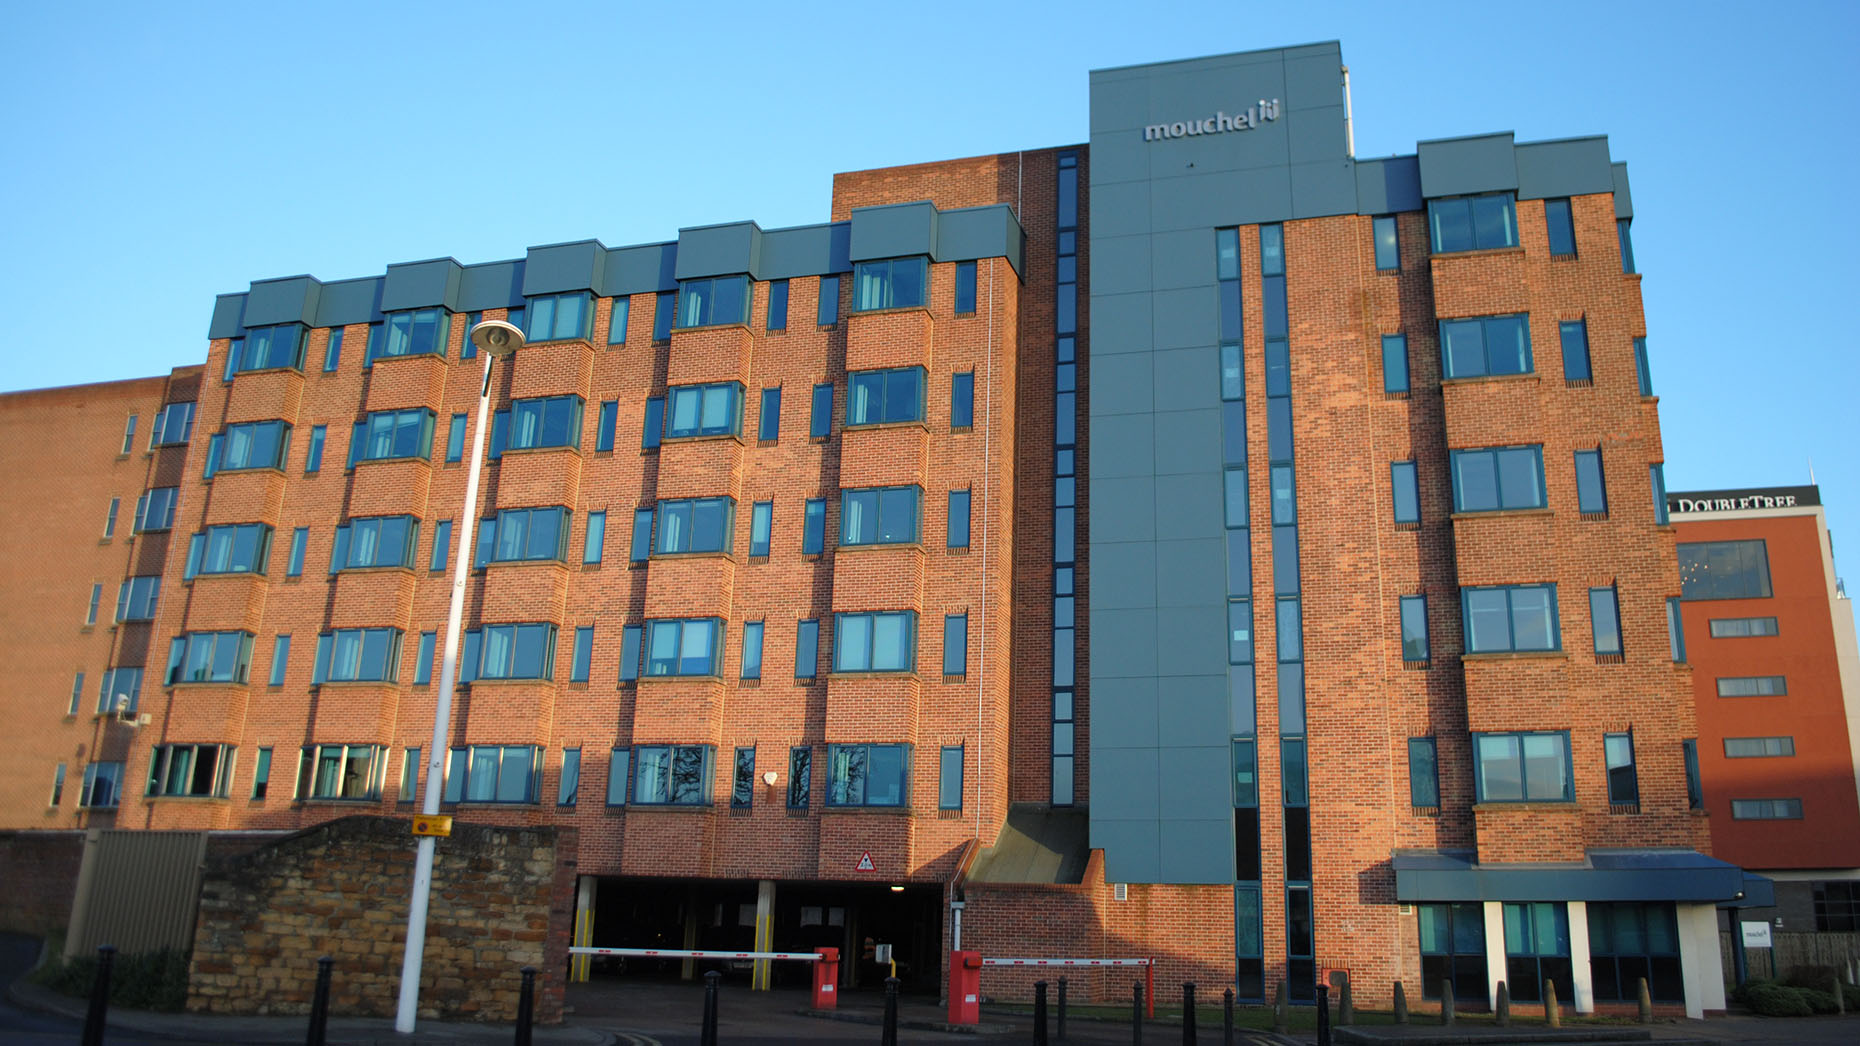 The former Mouchel offices were based at Mill House in Lincoln